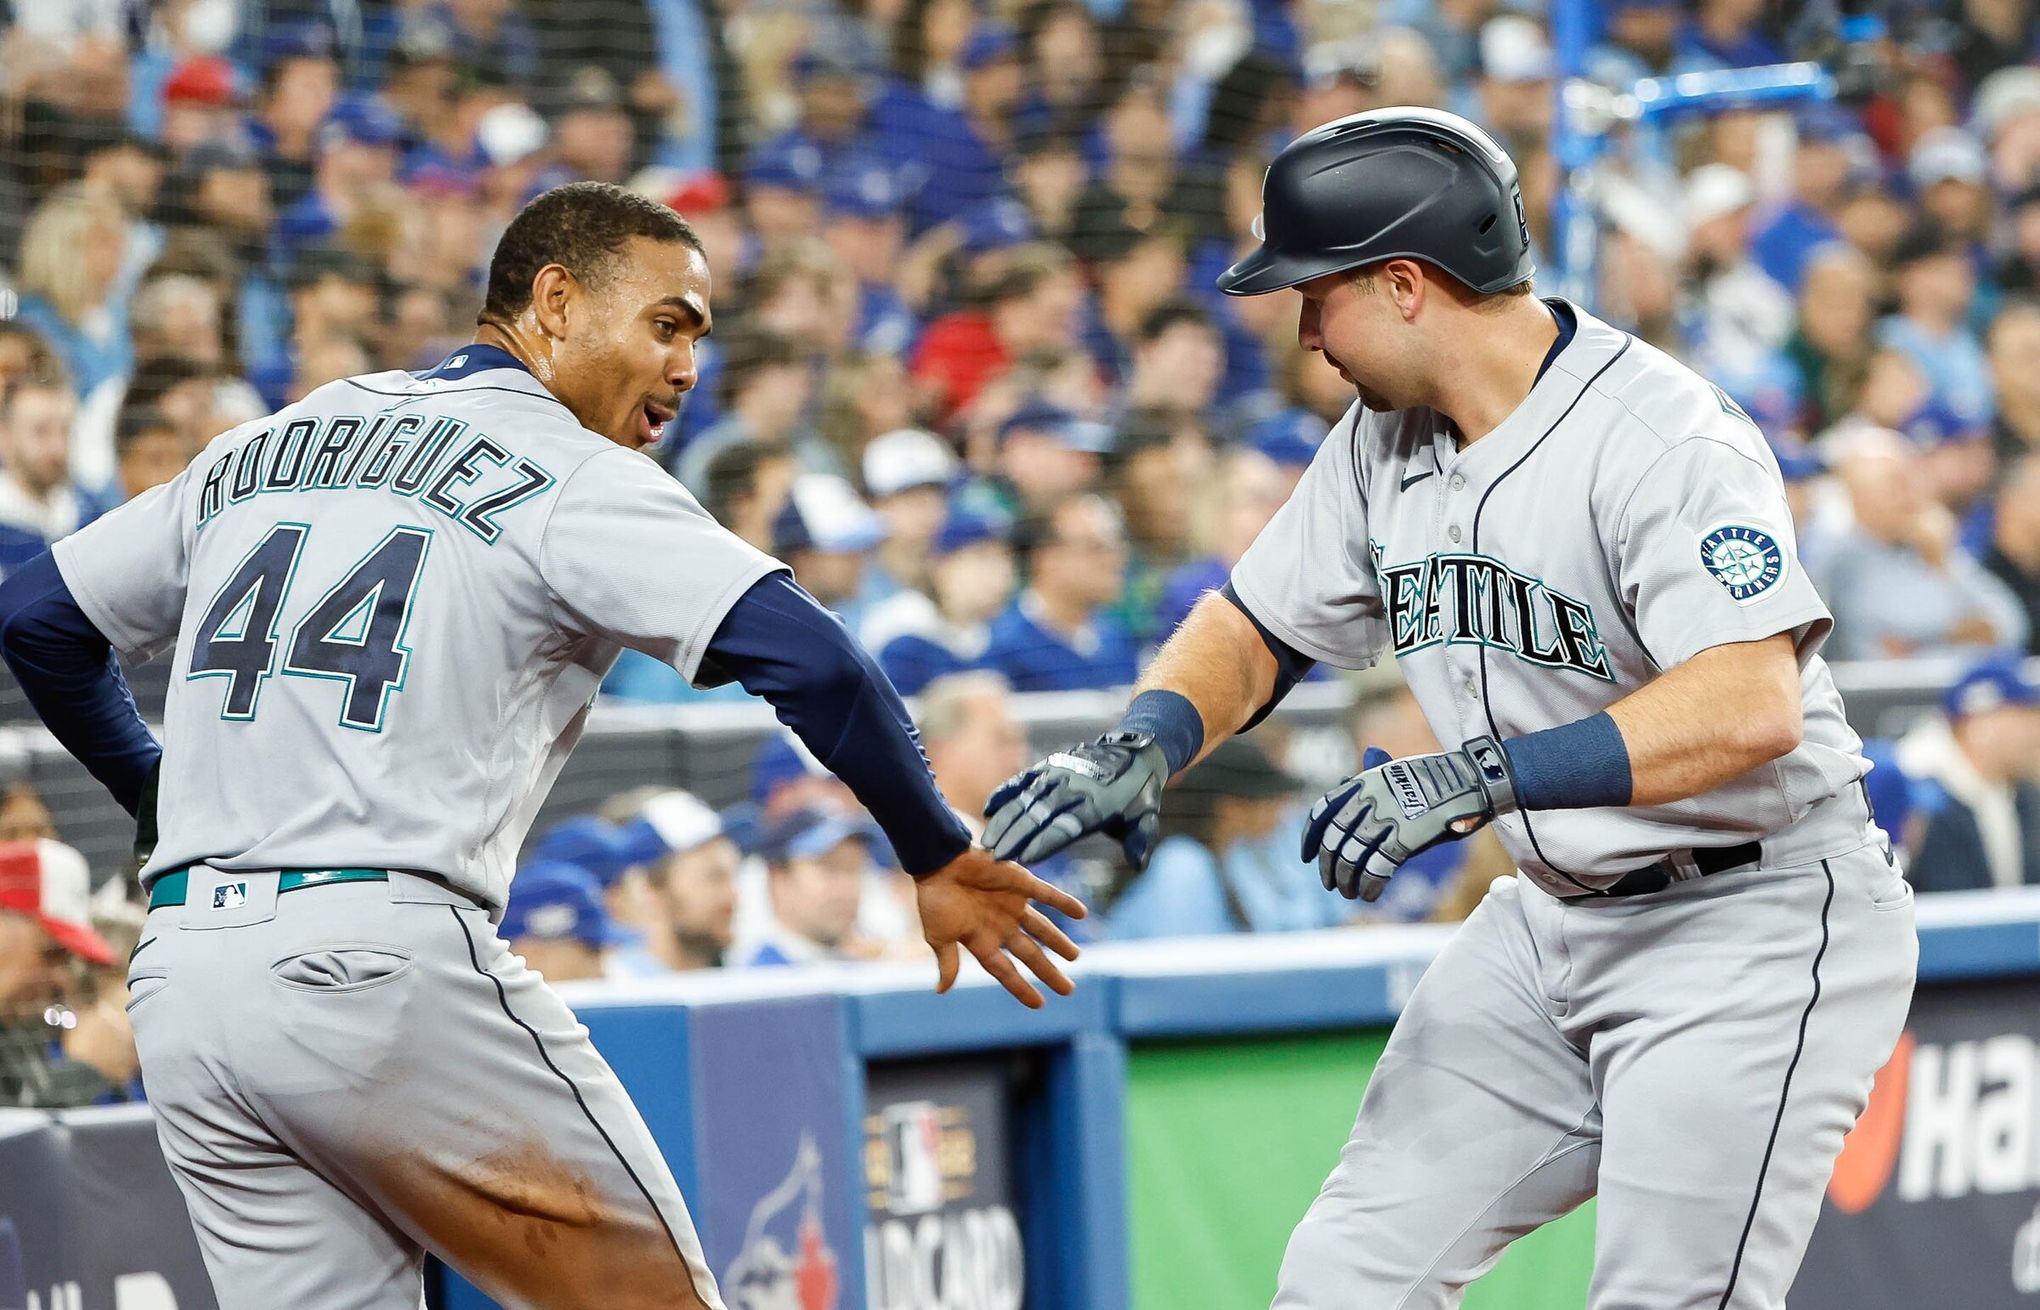 Analysis: Breaking down the ALDS between the Mariners and Astros